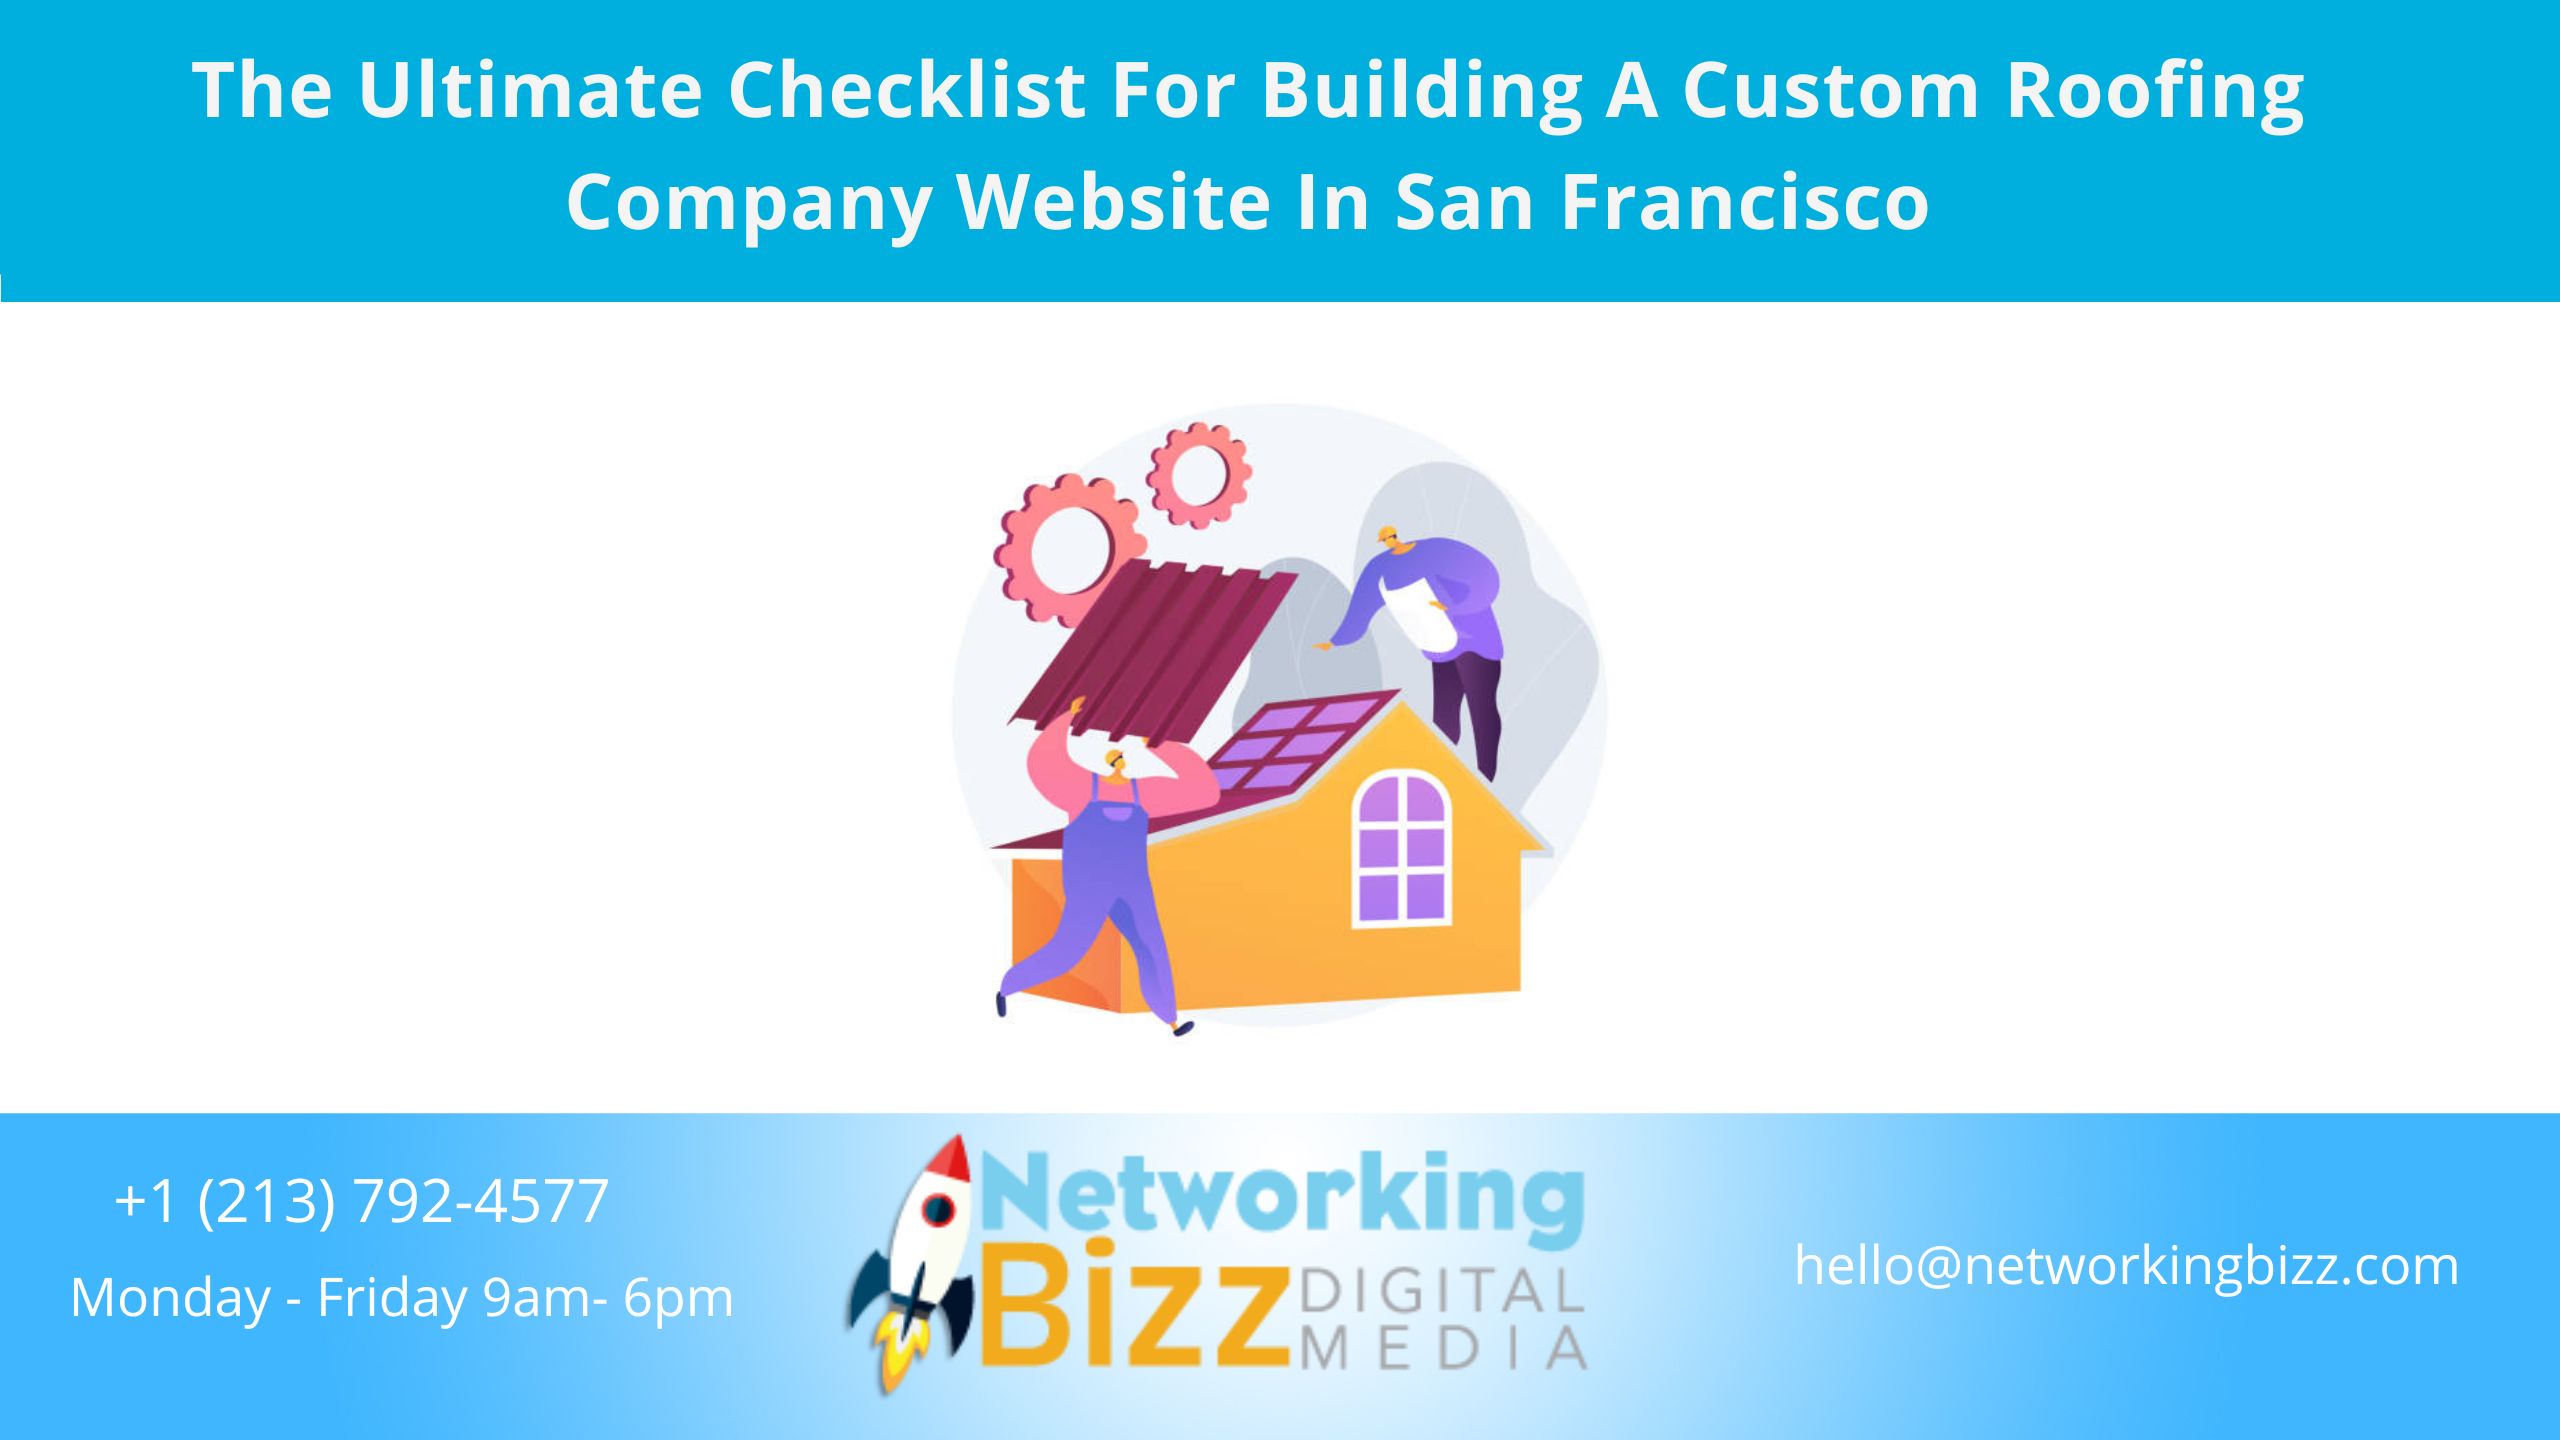 The Ultimate Checklist For Building A Custom Roofing Company Website In San Francisco